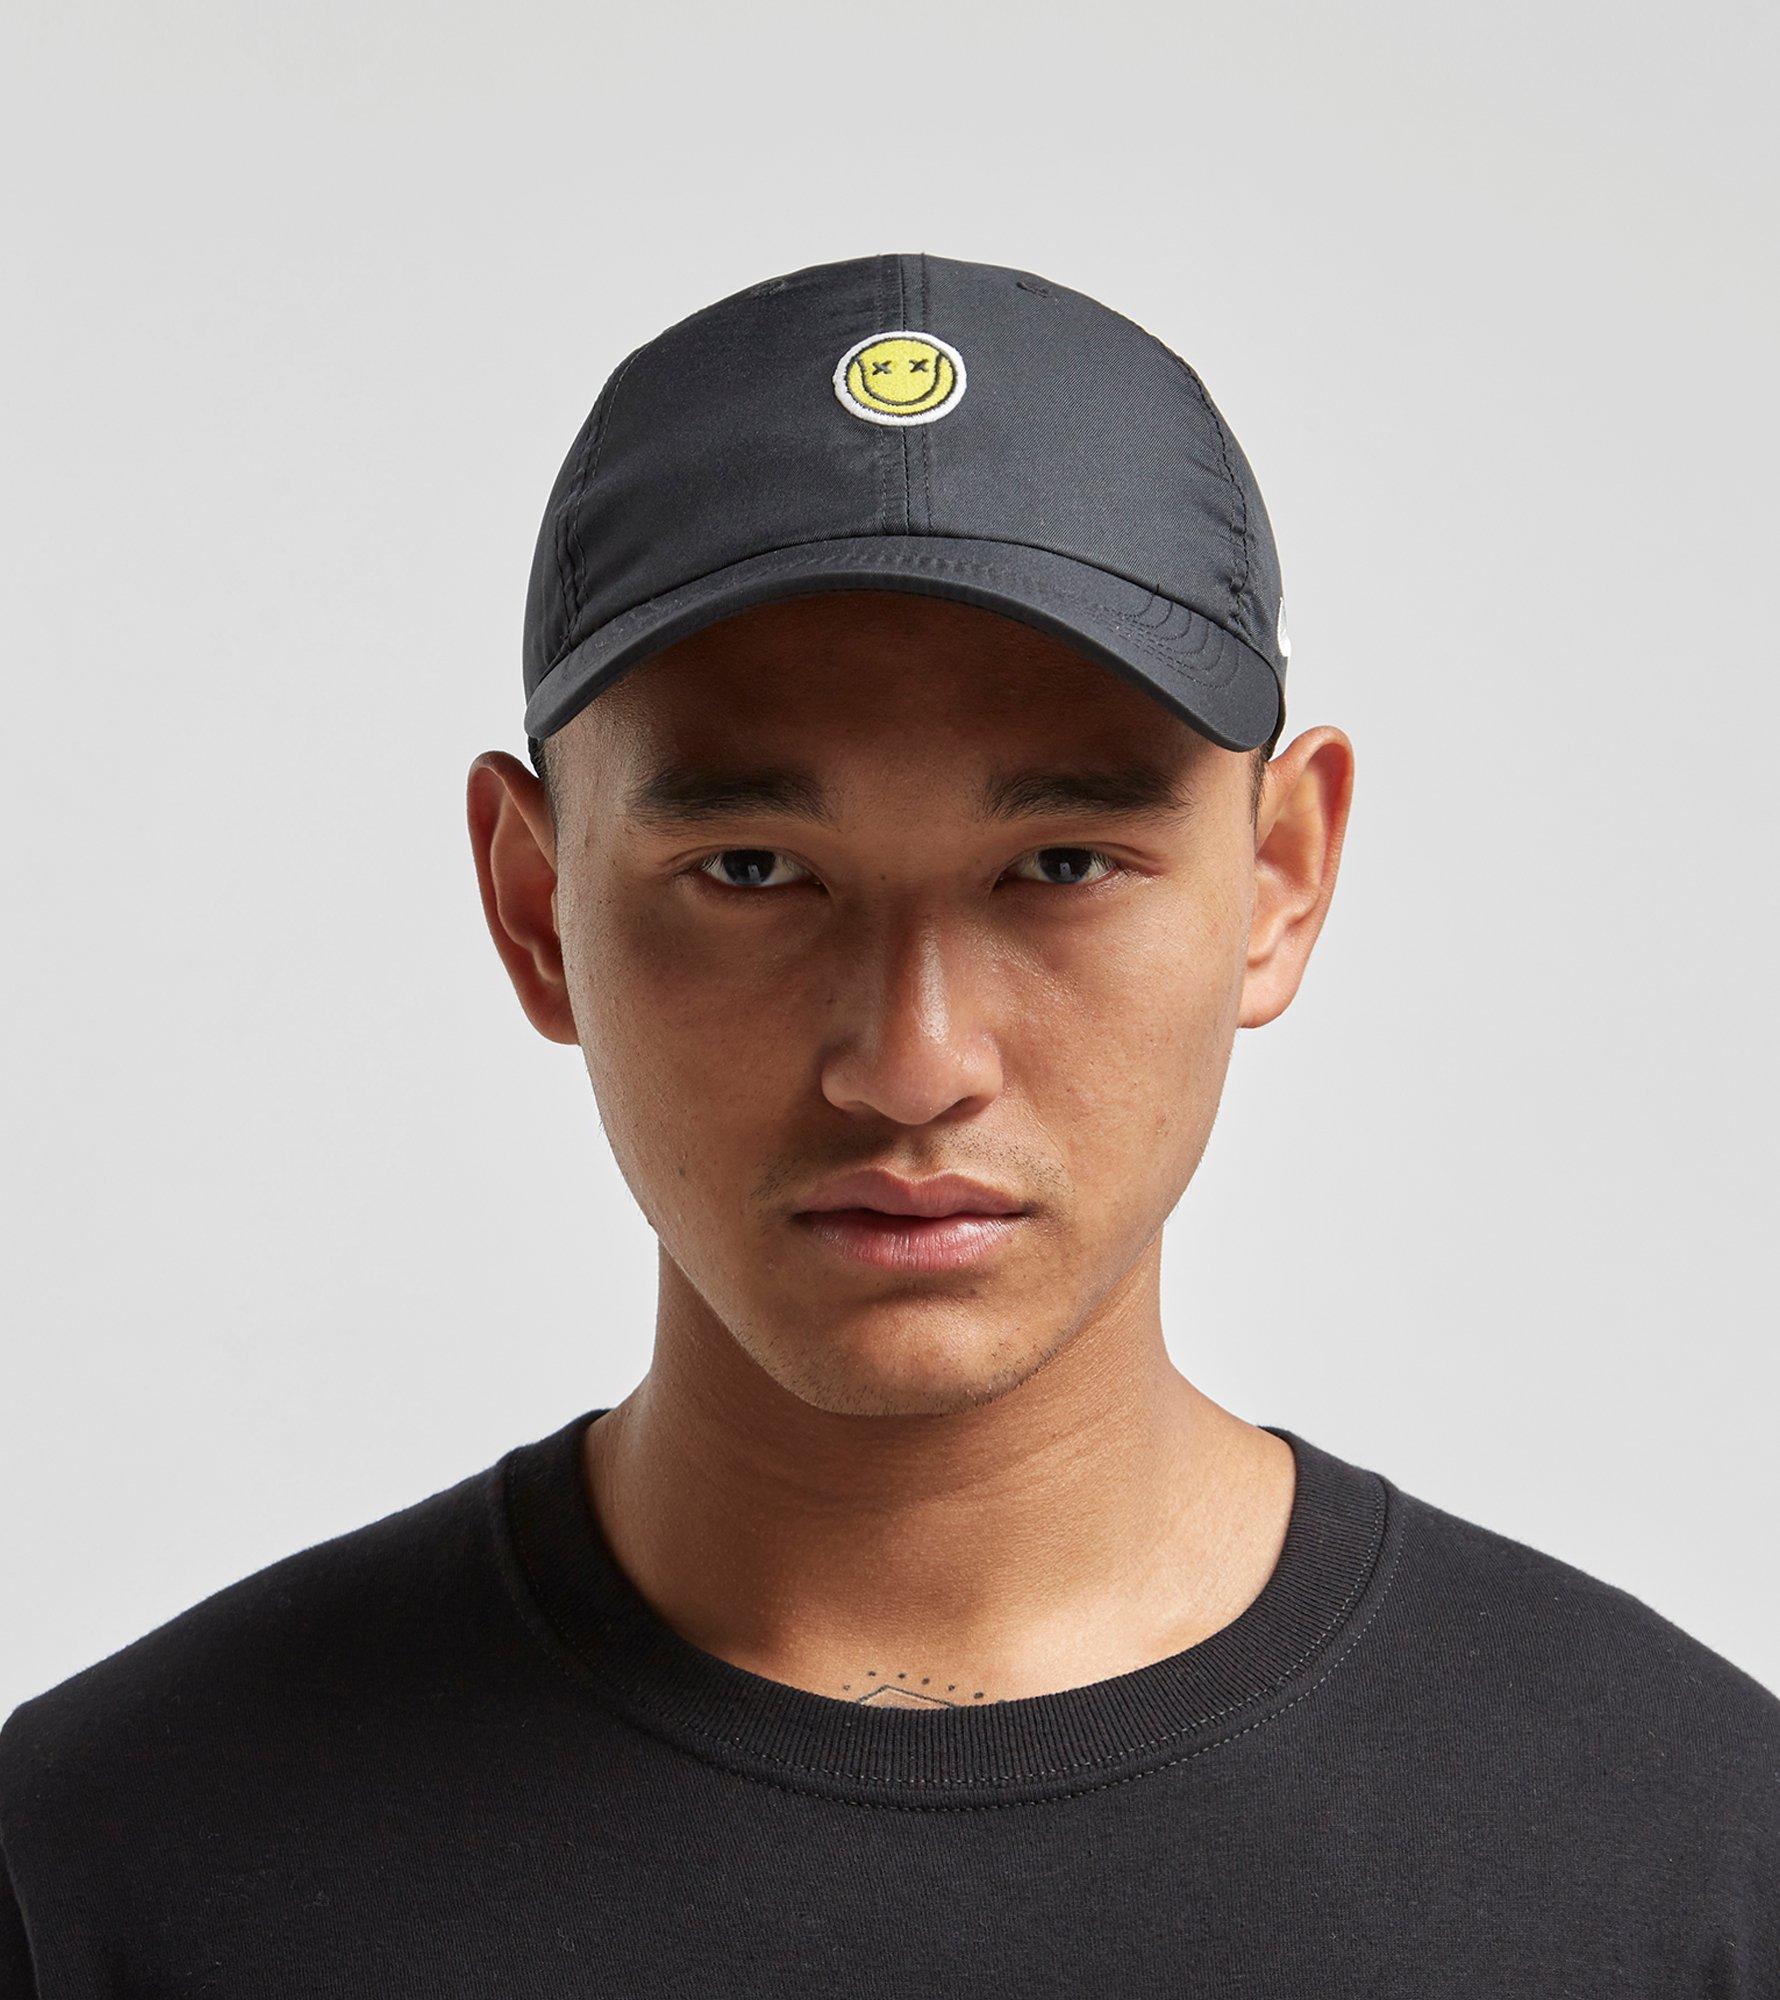 size? on Twitter: "The @Nike AeroBill H86 Tennis Smile Cap. Available online and in selected size? stores #sizeHQ Shop now: https://t.co/edFHJTwipY https://t.co/XrWdHO33Cp" Twitter